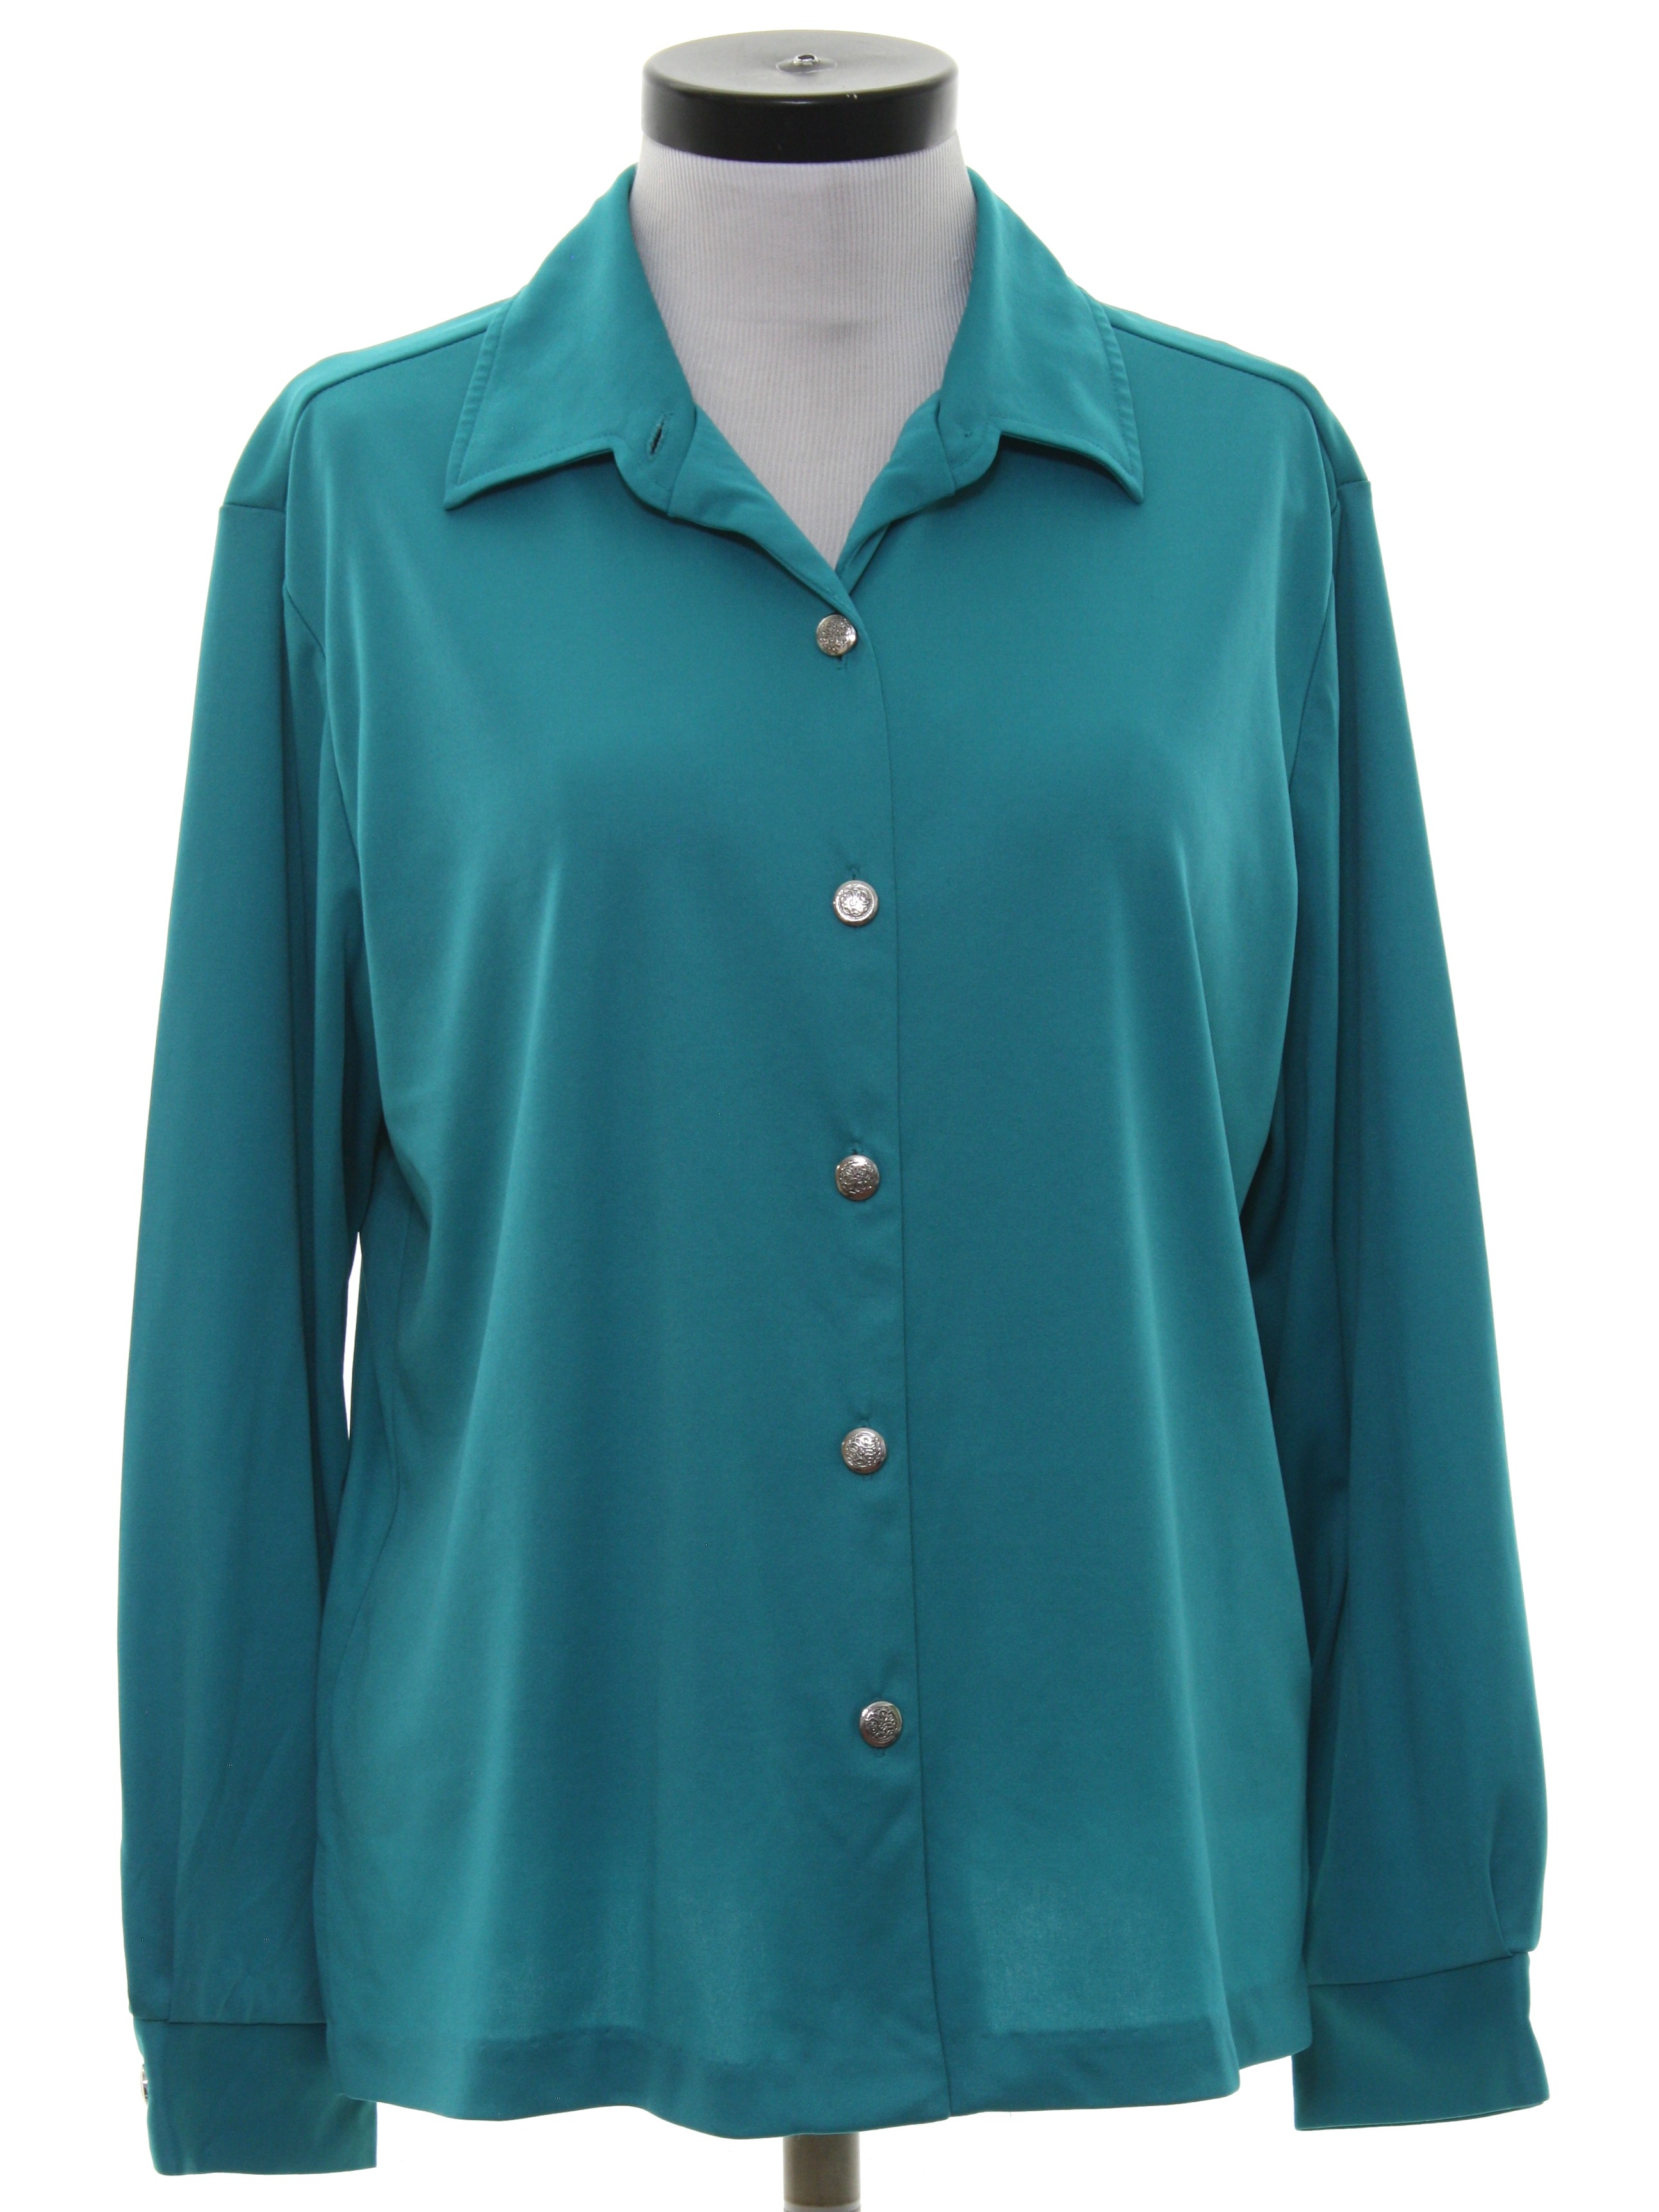 Retro 80's Shirt: 80s -Haband- Womens teal background slinky polyester ...